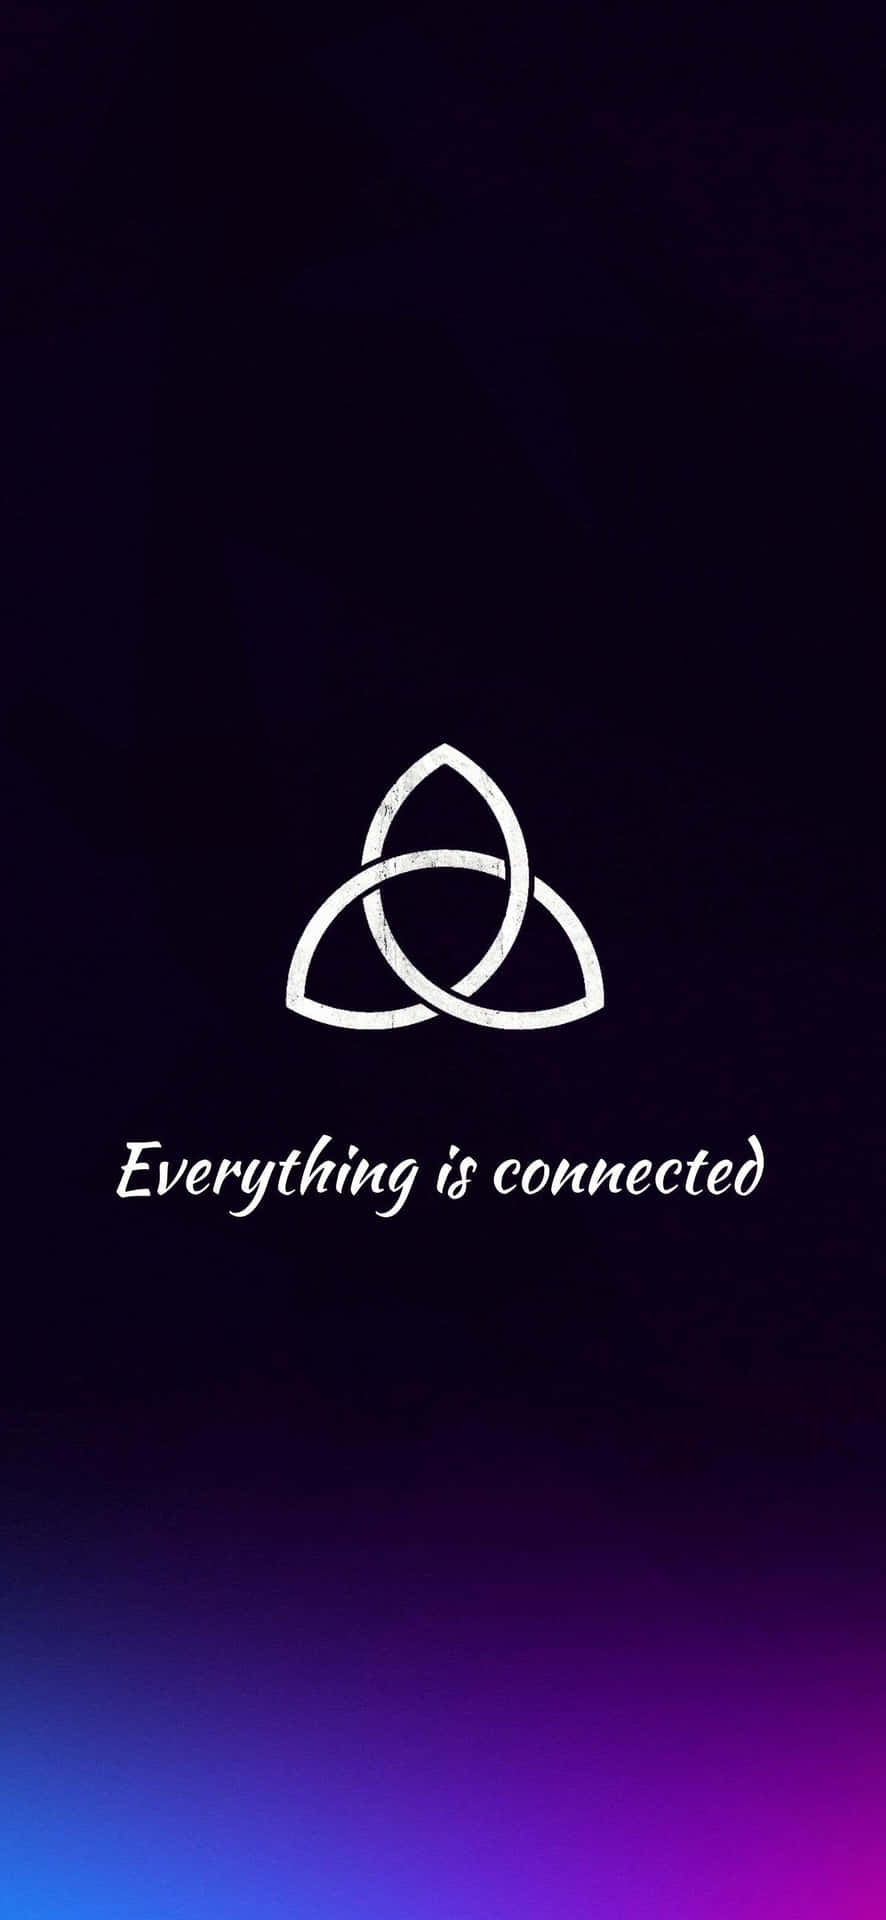 Everything Is Connected With Triquetra Symbol Wallpaper